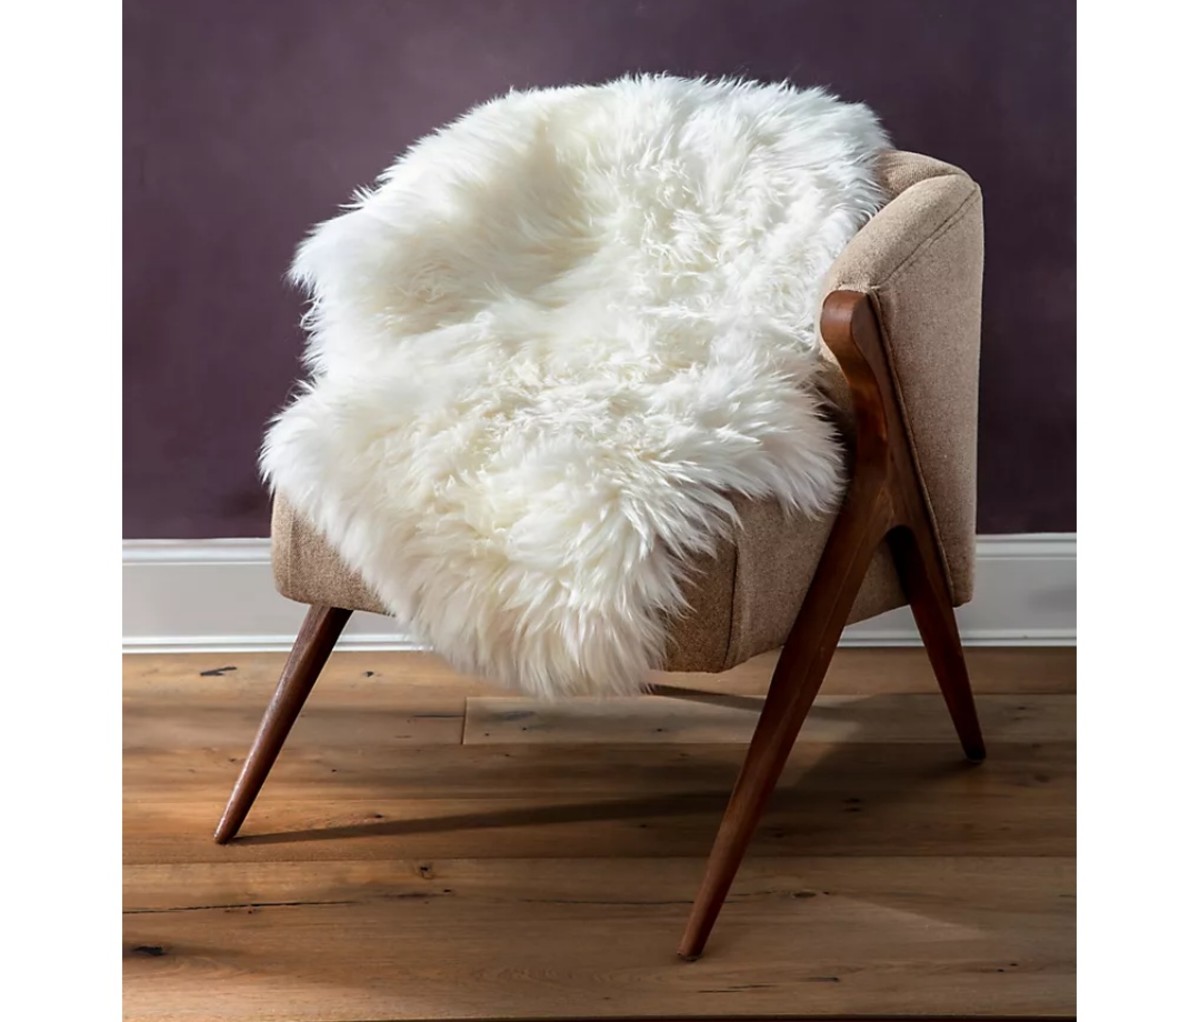 Overland Sheepskin Co. Single-Pelt Premium Australian Sheepskin Rug thrown over a chair with a purple wall in the background. Mother's Day gifts.